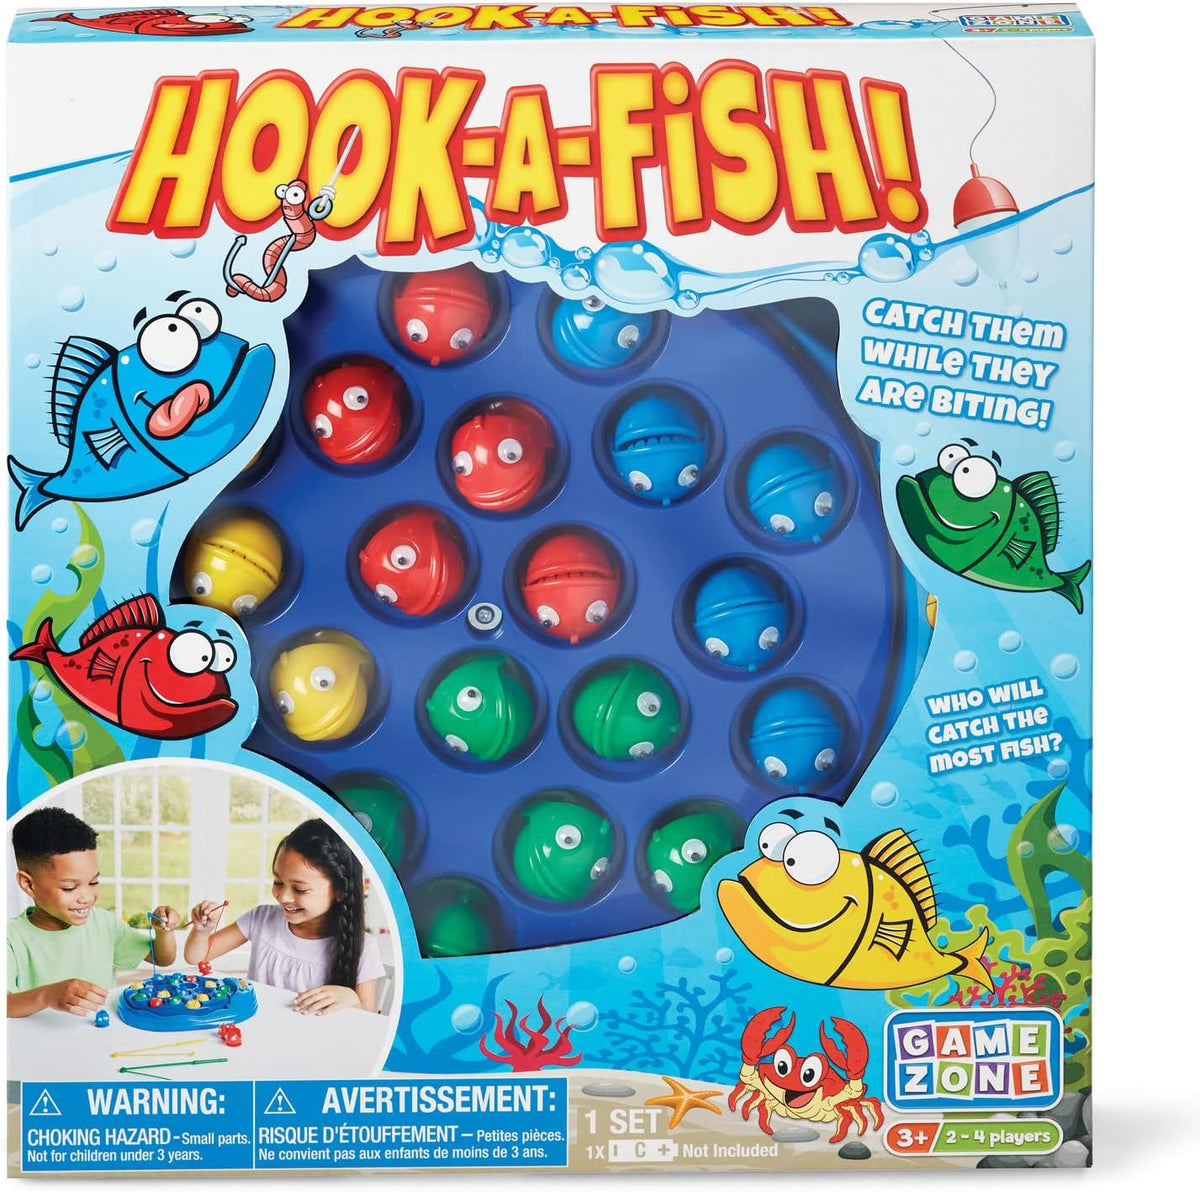 Hook-a-Fish! Cover